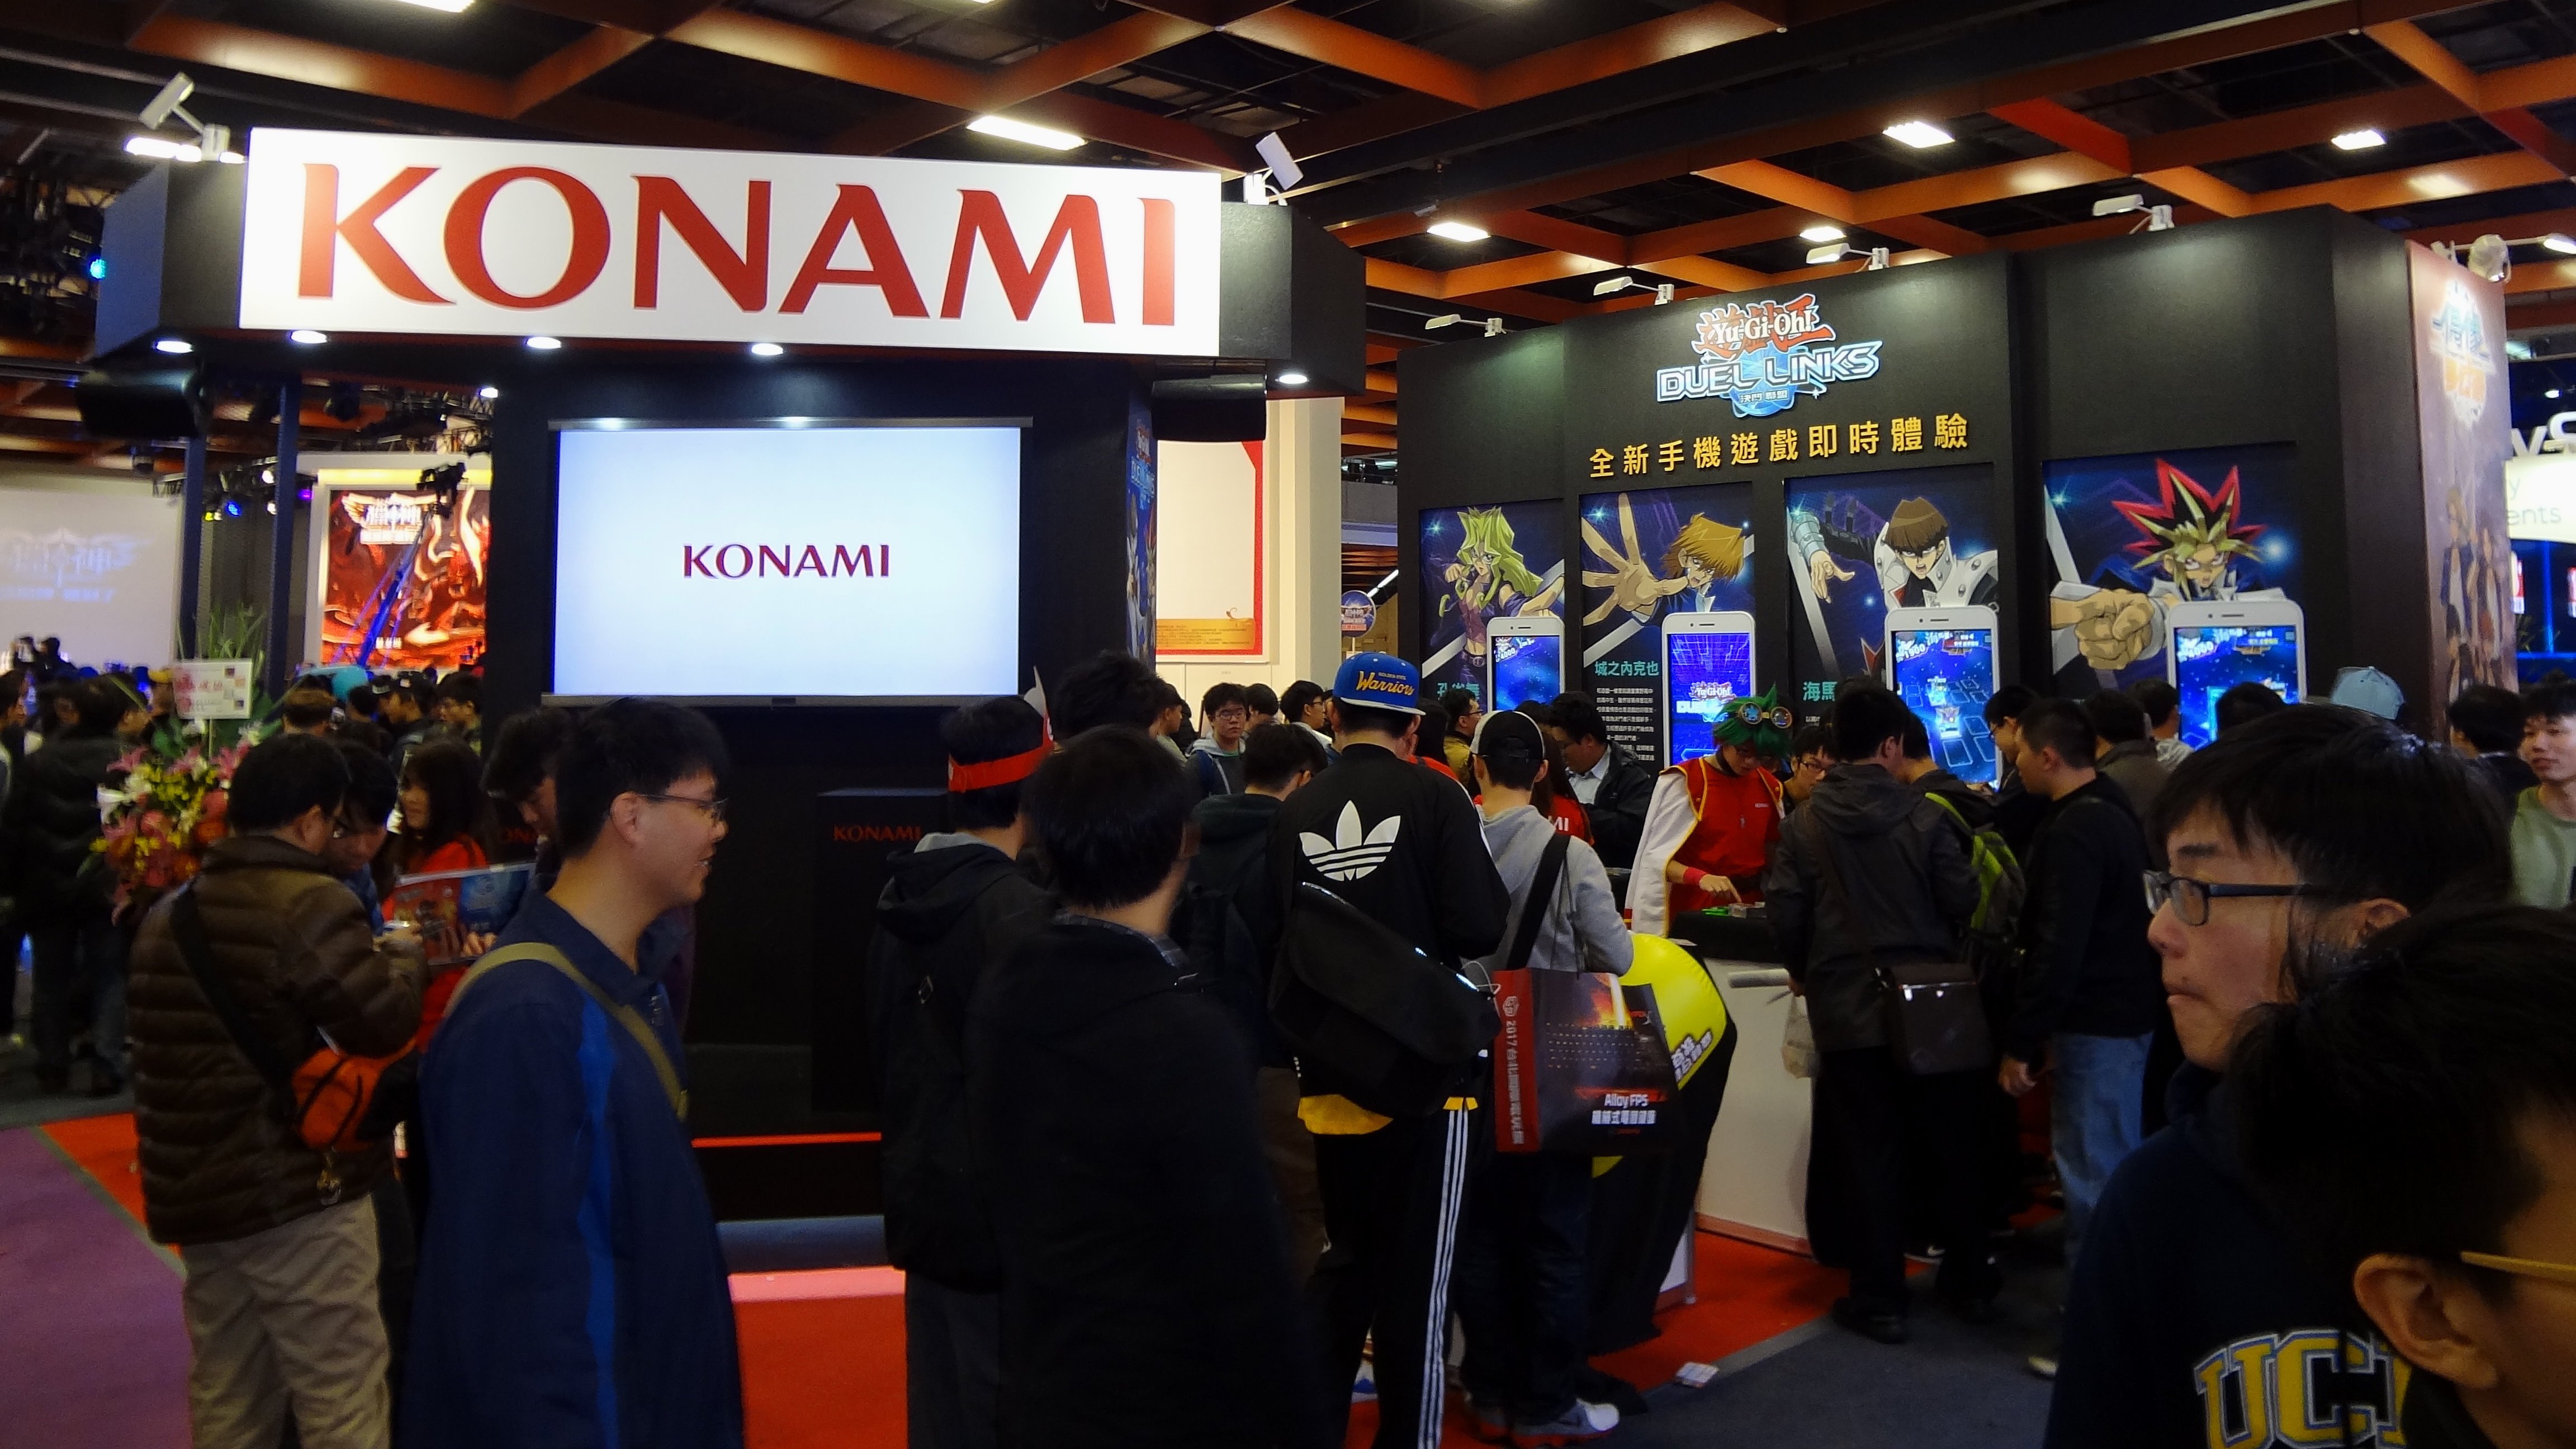 Konami has started construction on a building dedicated to esports in